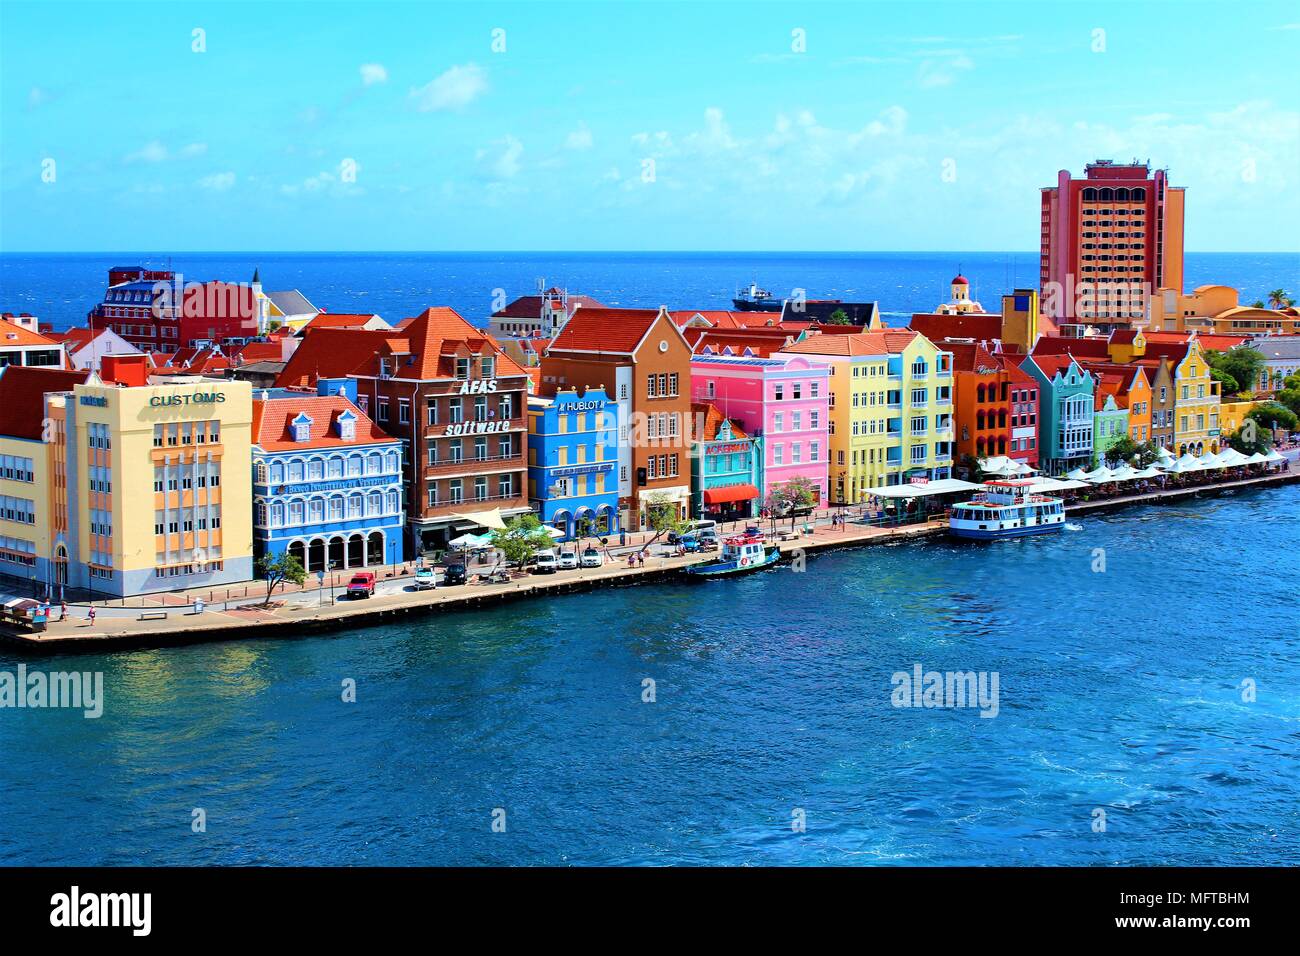 WILLEMSTAD, CURACAO - FEBRUARY 21ST 2018: A view of downtown Willemstad  taken from the top of a cruise ship docked in Willemstad port Stock Photo -  Alamy